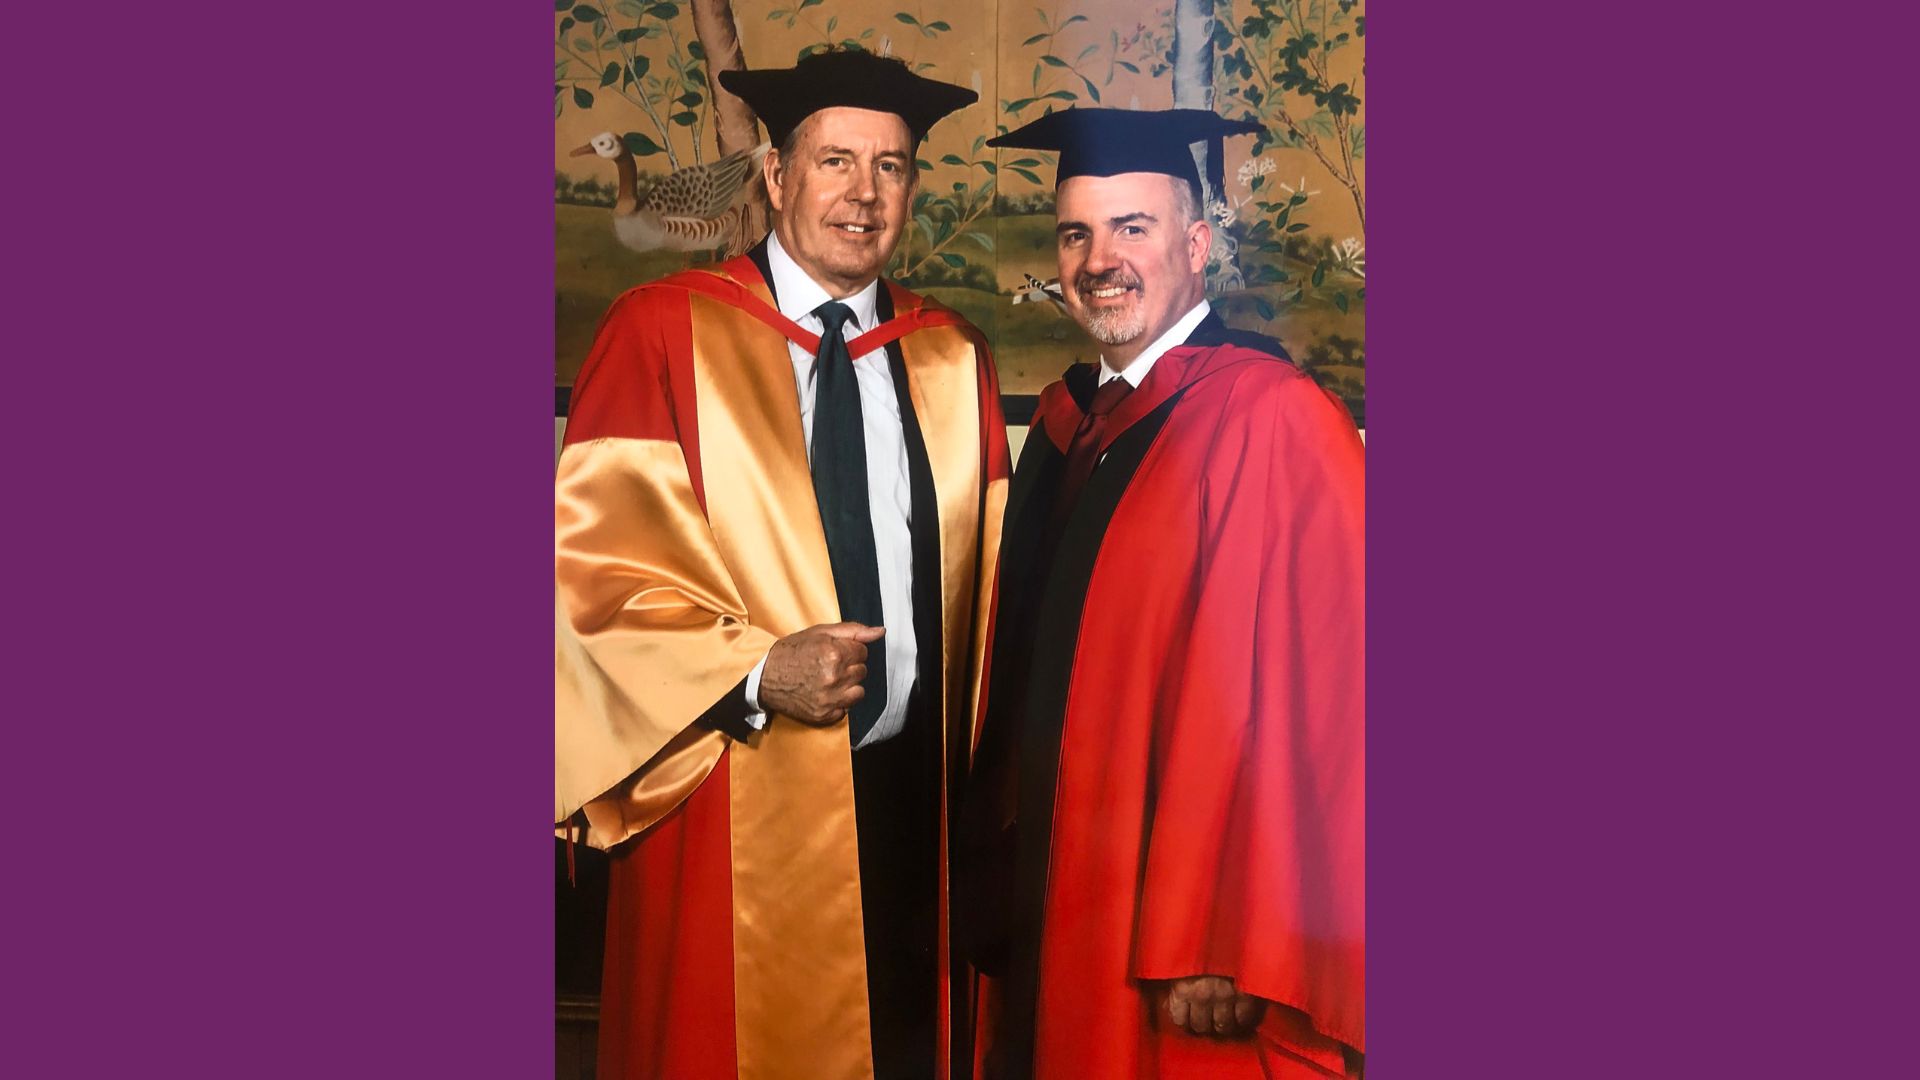 Two men in academic gowns